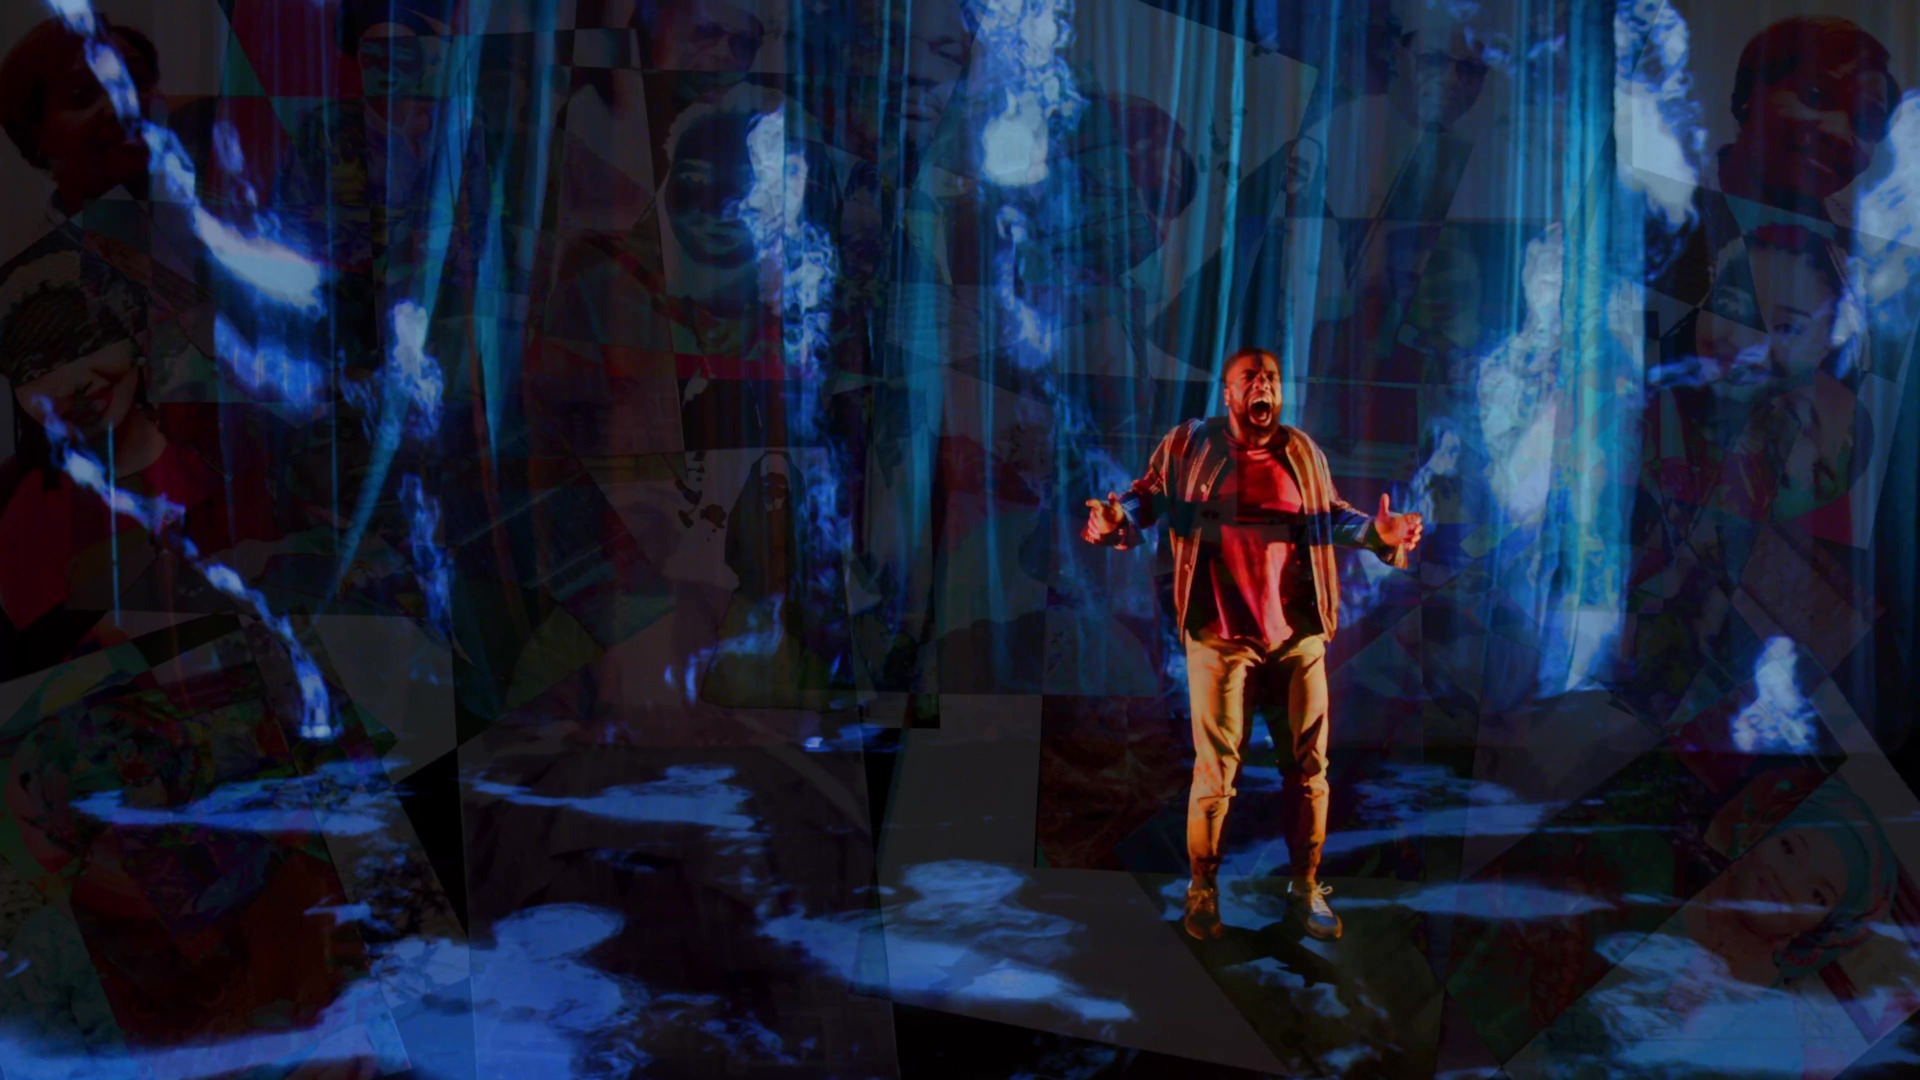 Image of young black man, hands out in front, yelling or screaming. He is standing on stage in front of a misty black backdrop with various projections. 